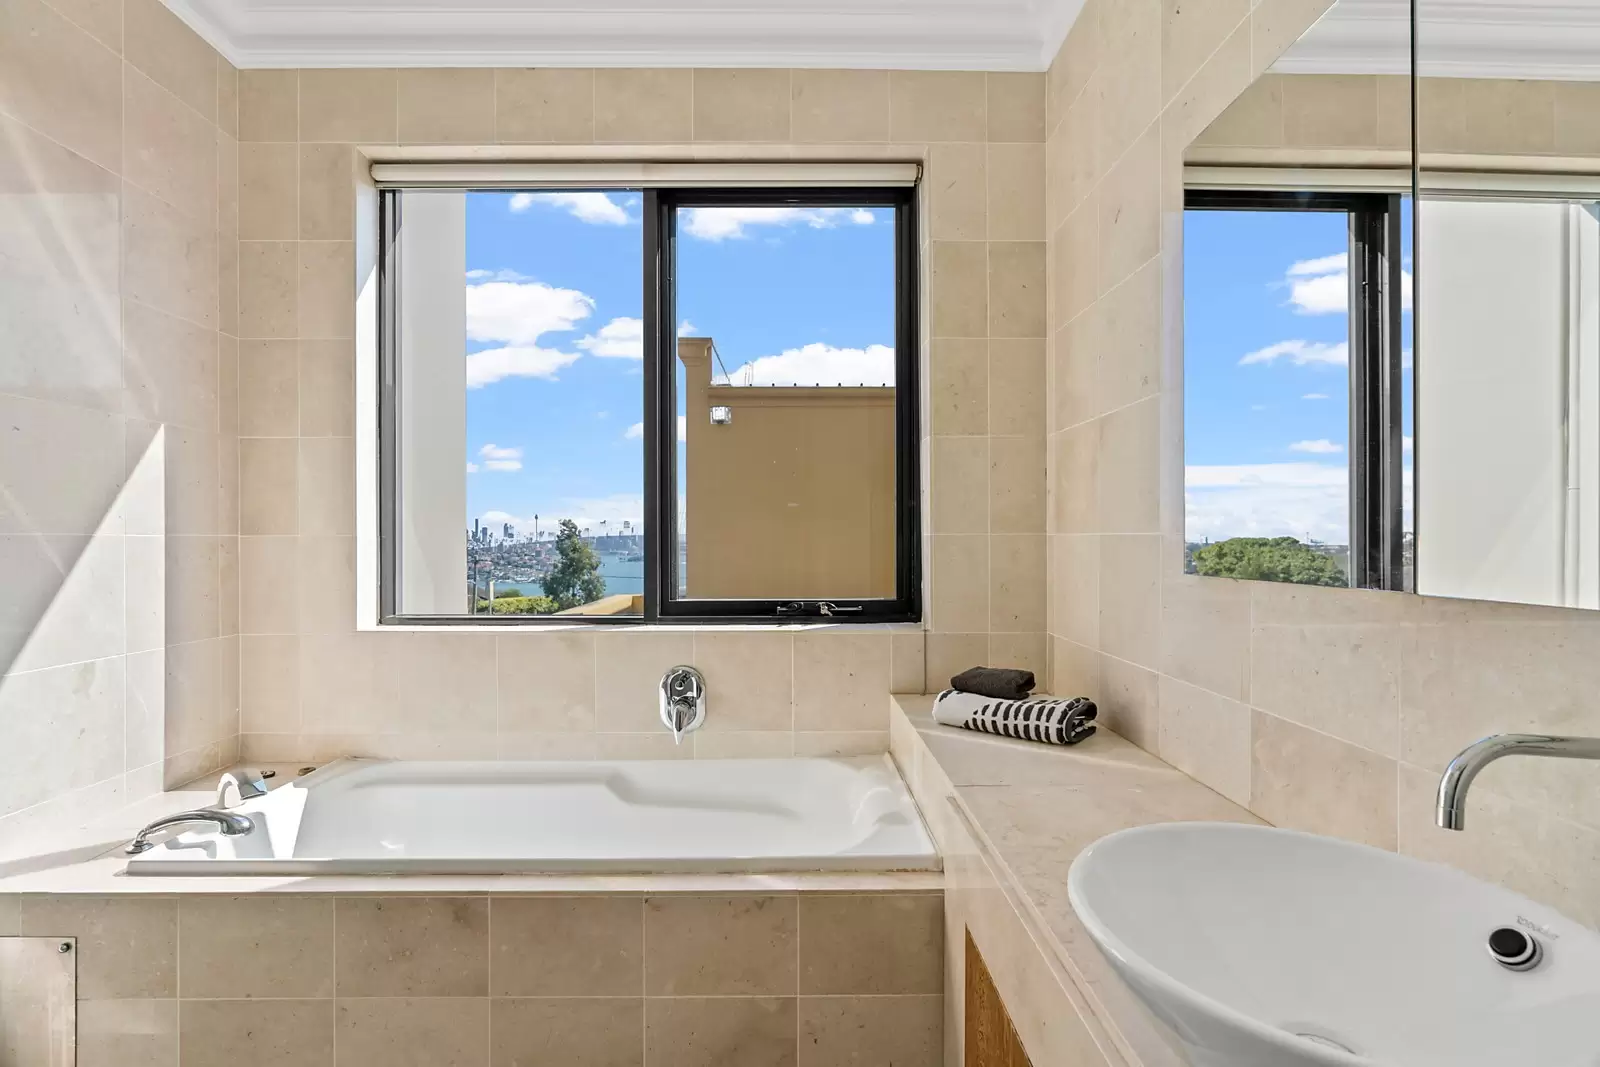 Photo #20: 7 Dalley Avenue, Vaucluse - Sold by Sydney Sotheby's International Realty